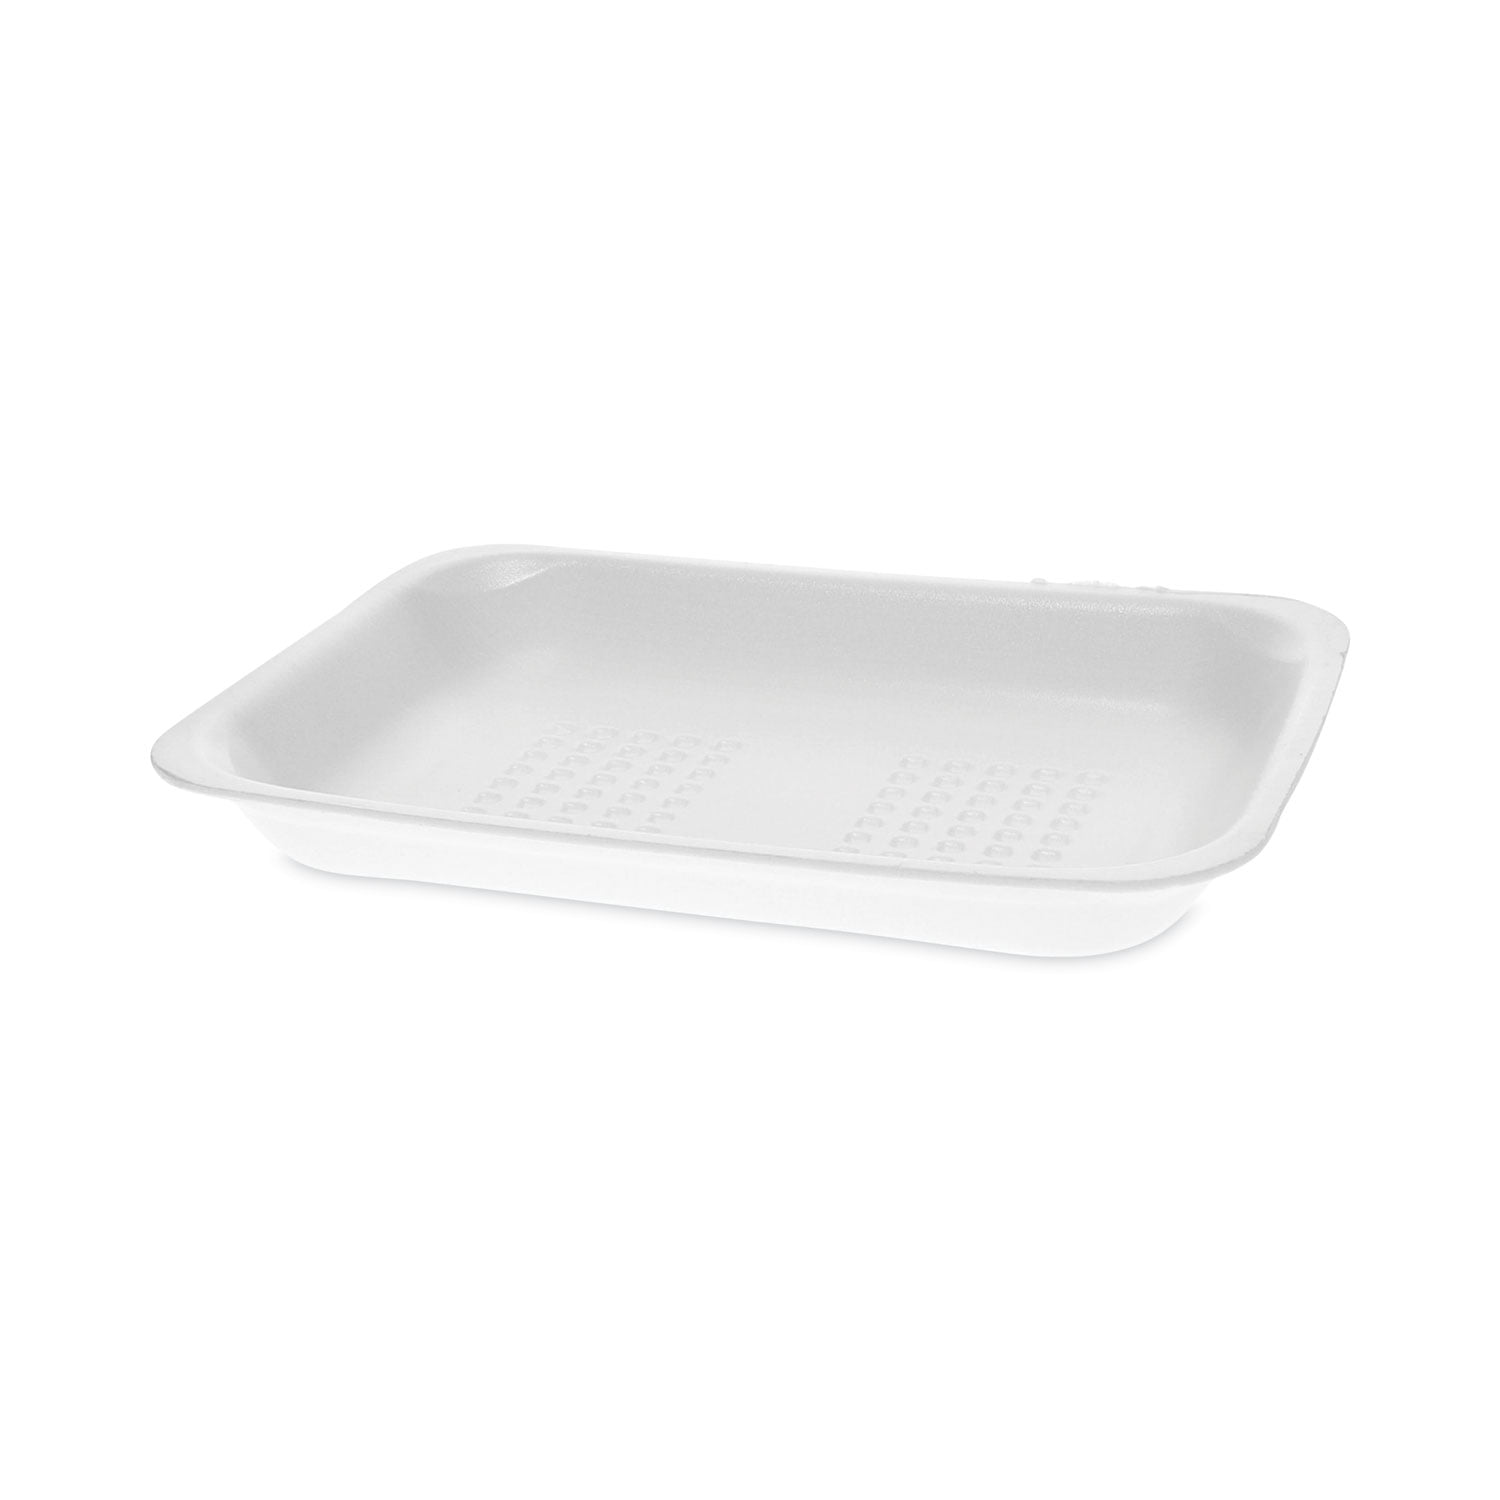 Novipax Foam Tray - 2PL, White  United Packaging Products, Inc.